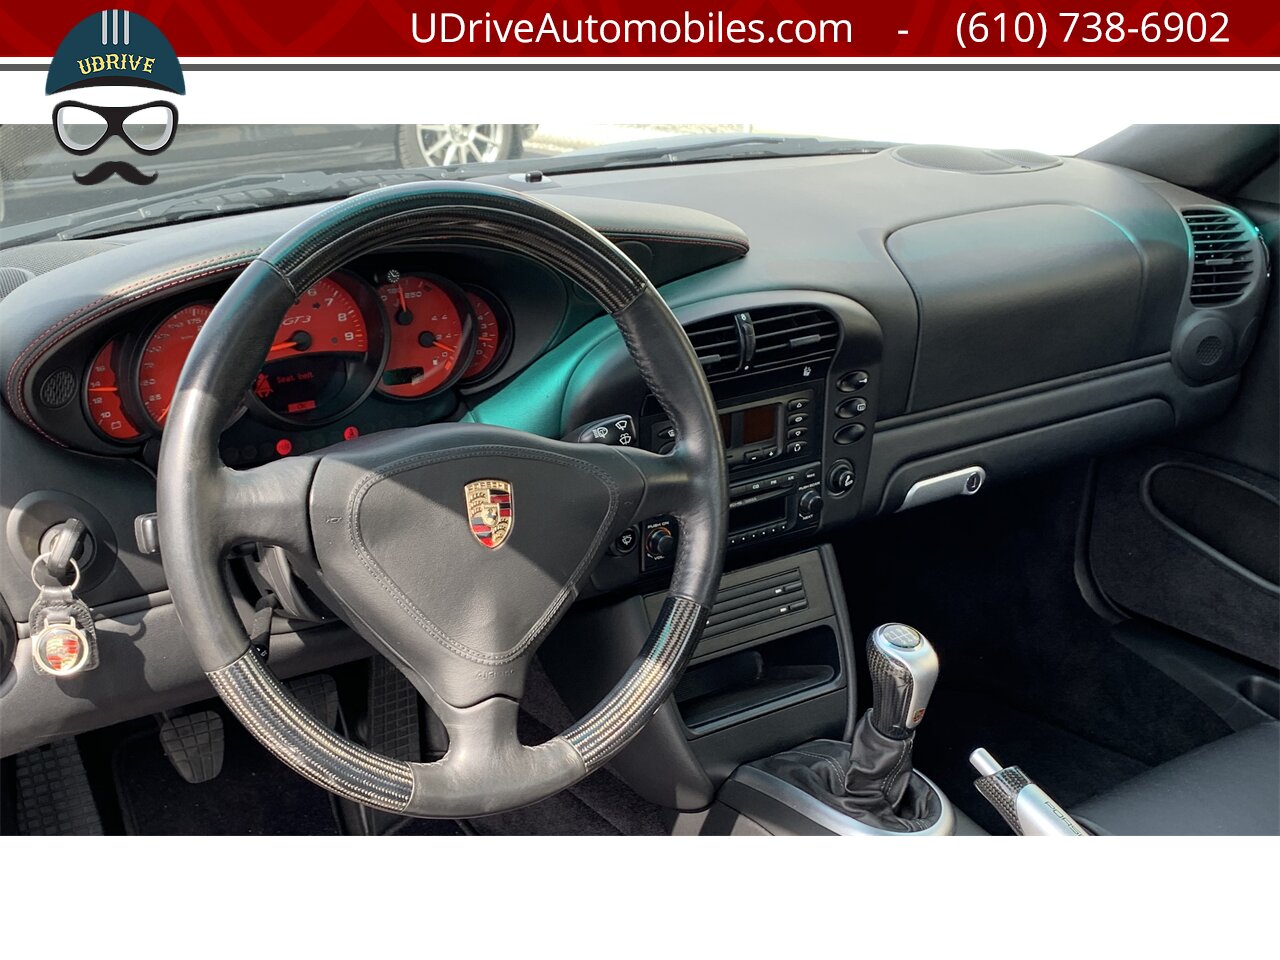 2004 Porsche 911 GT3 996 PCCB Sport Seats Red Stitching $118k MSRP   - Photo 12 - West Chester, PA 19382